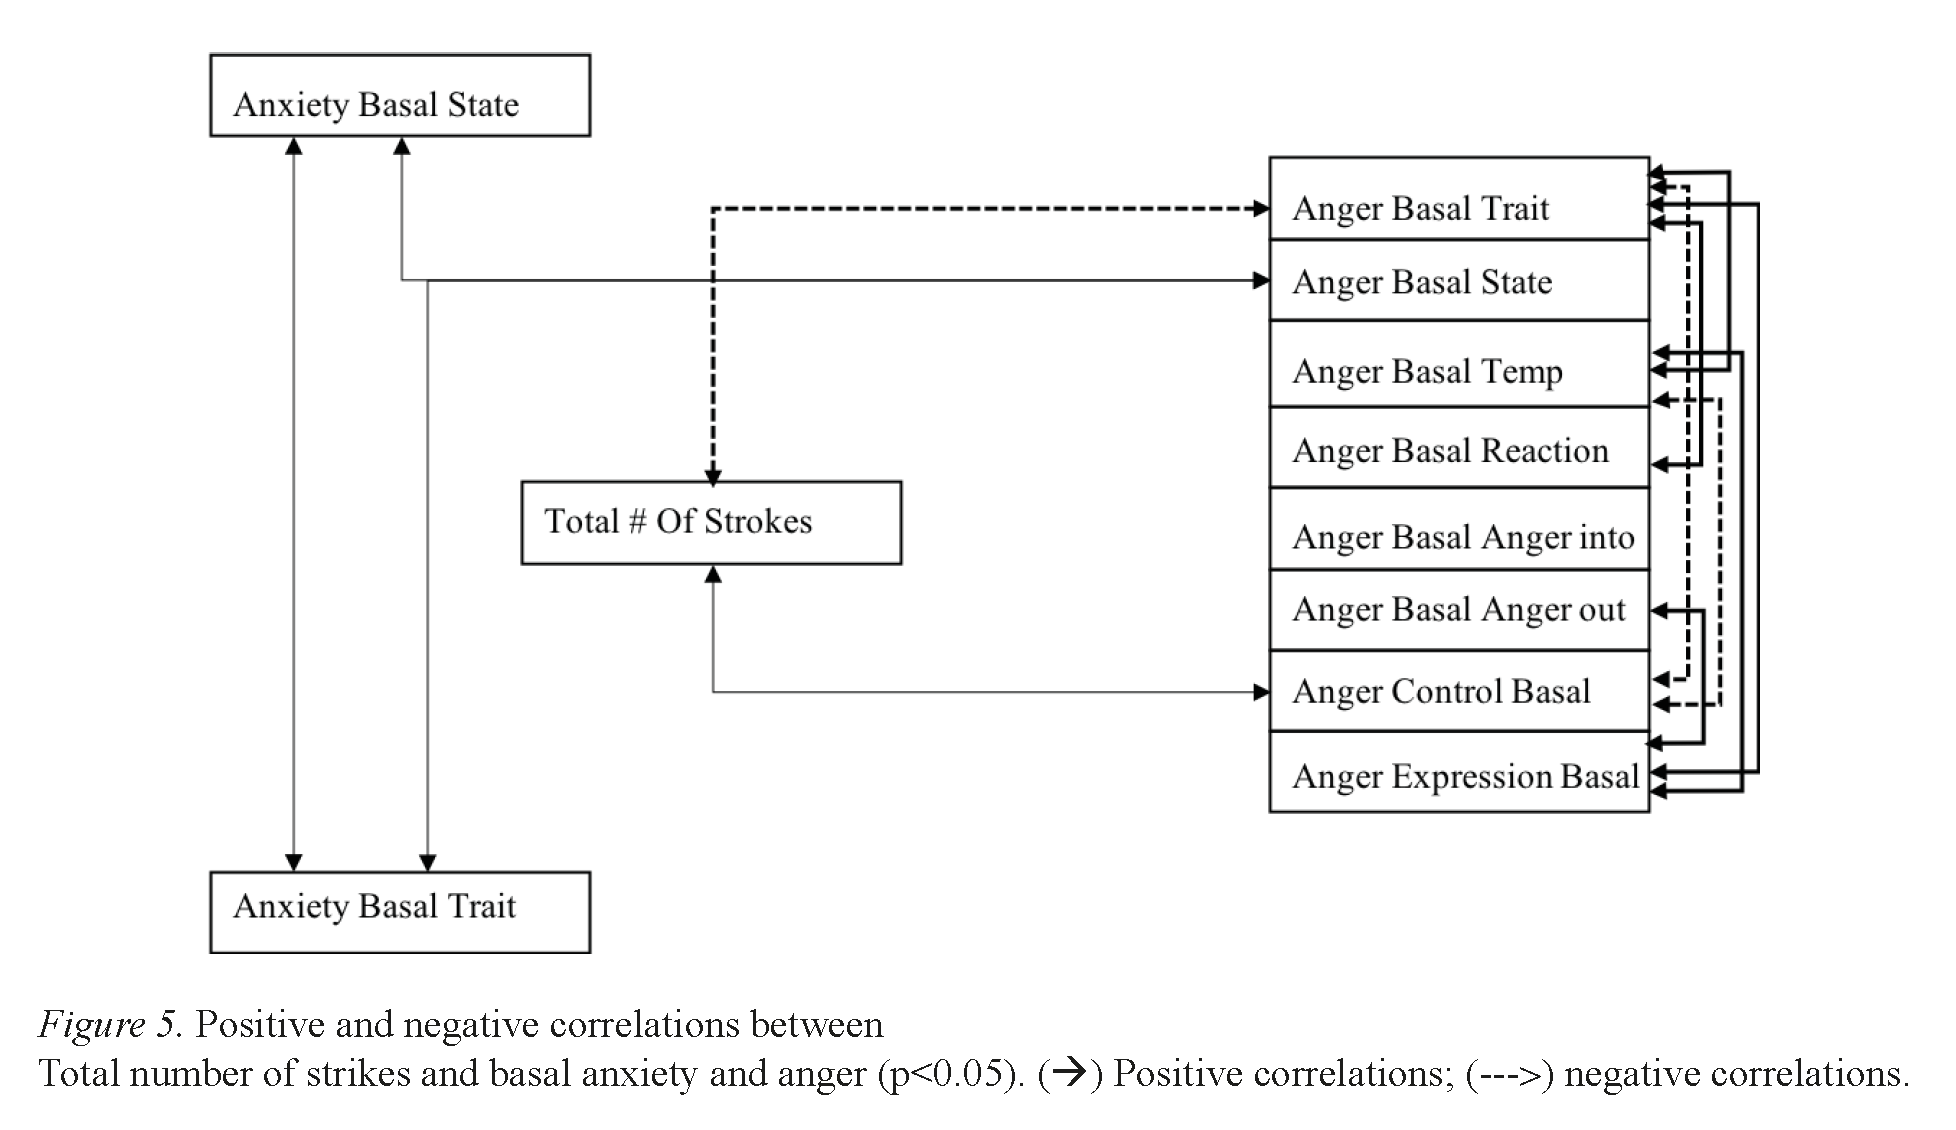 Positive and negative correlations between Total number of strikes and basal anxiety and anger (p<0.05).